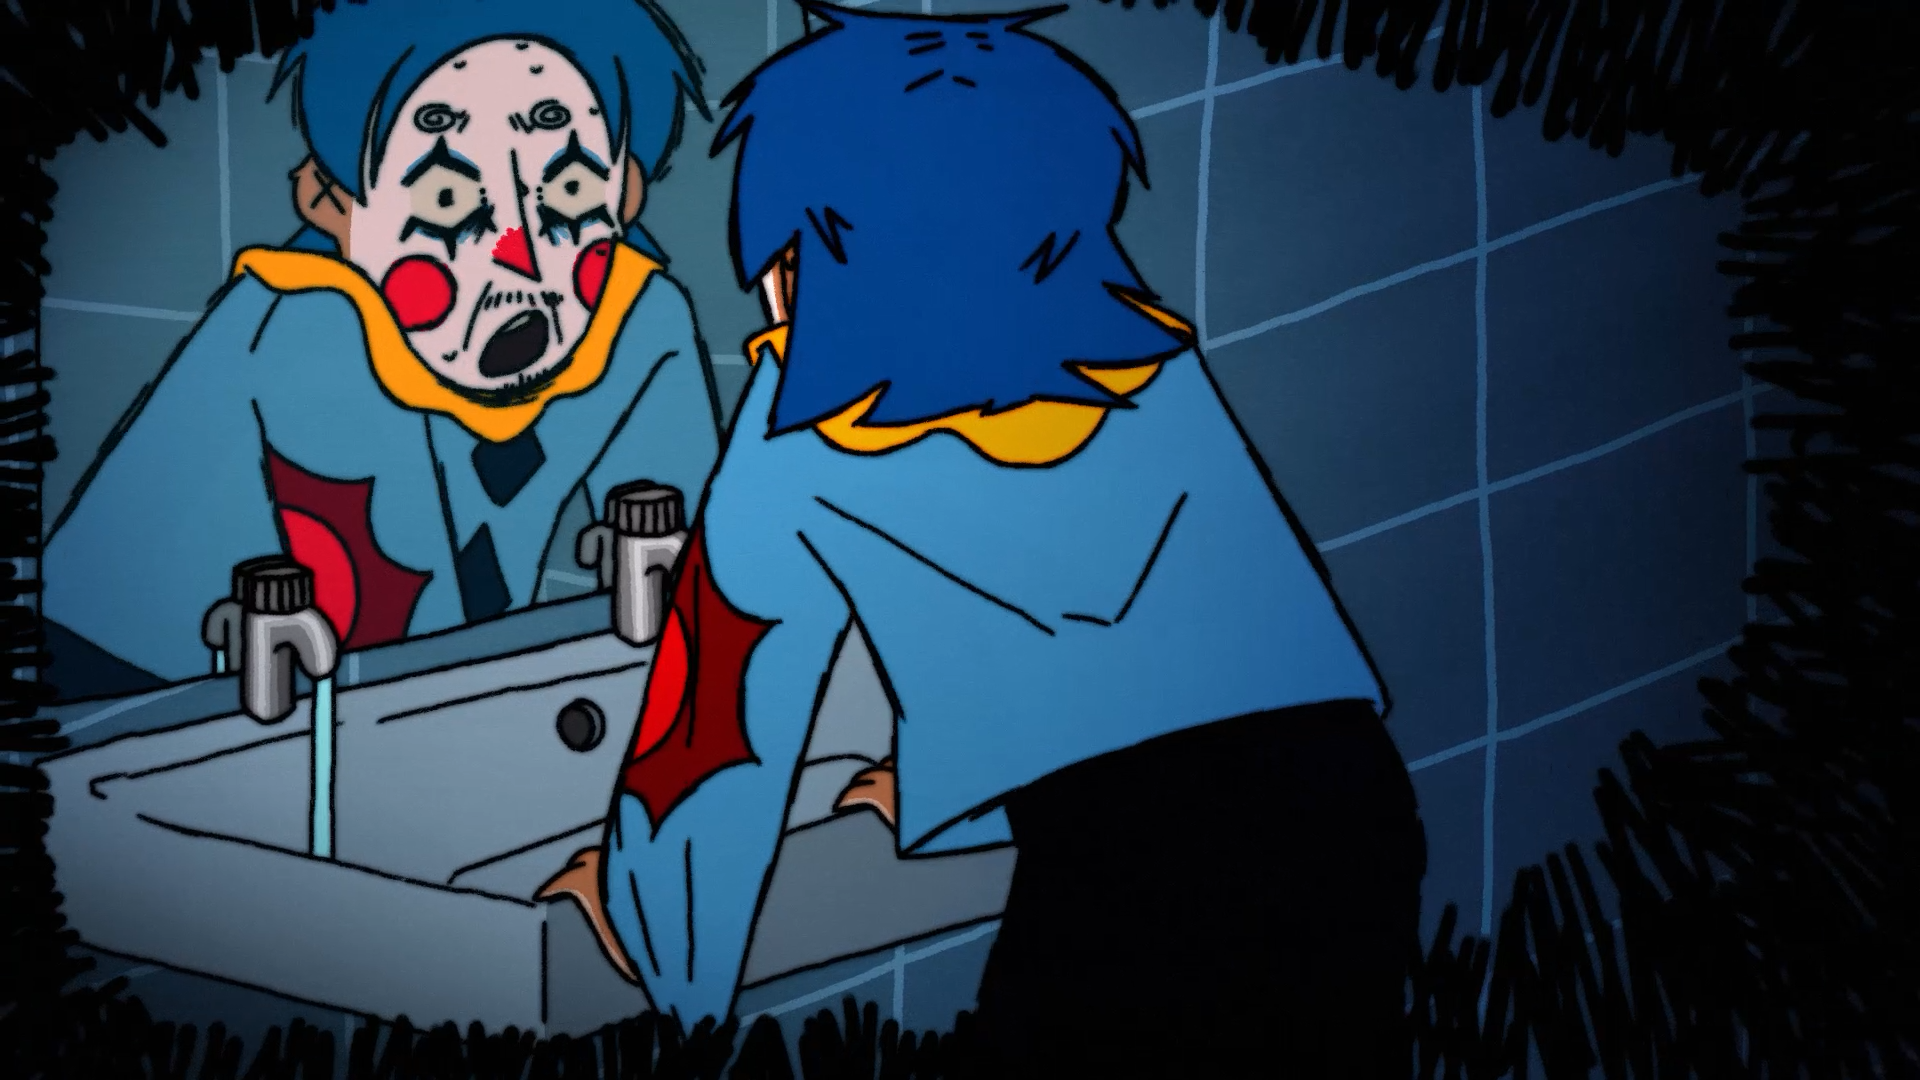 A still from an animation - a slightly rough looking clown stairs at his own reflection in the bathroom mirror. 